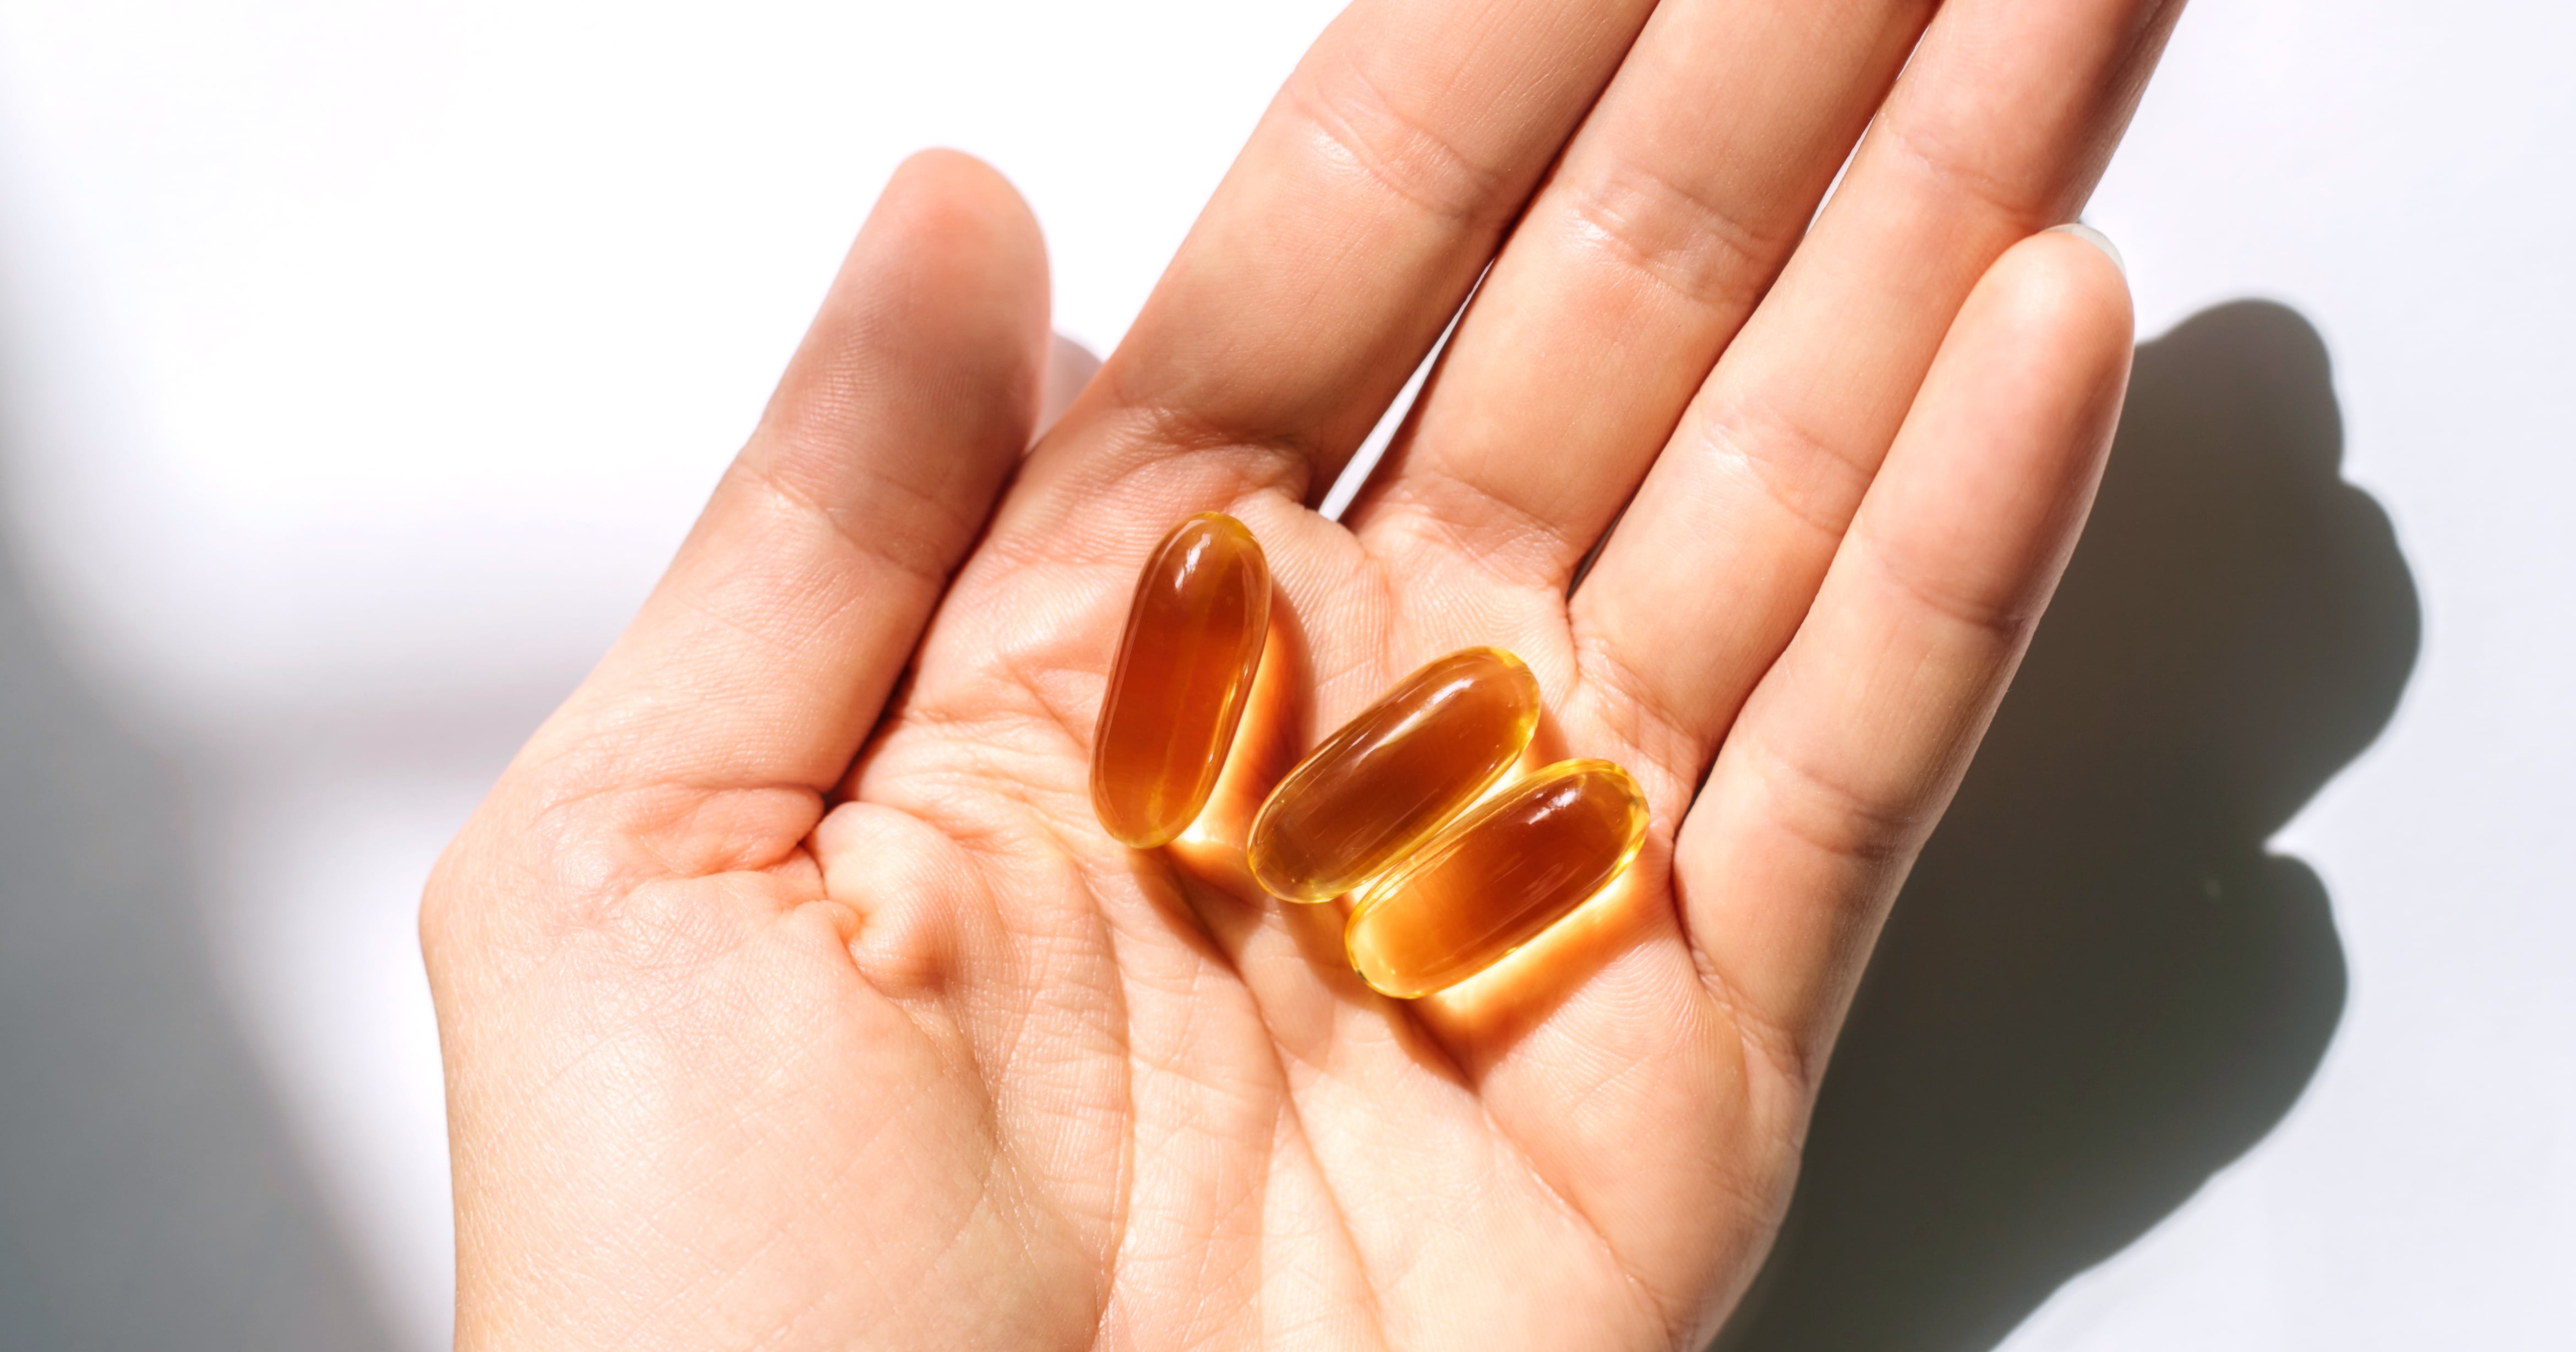 Is It True Fish Oil Helps With Acne? A Dermatologists Explains